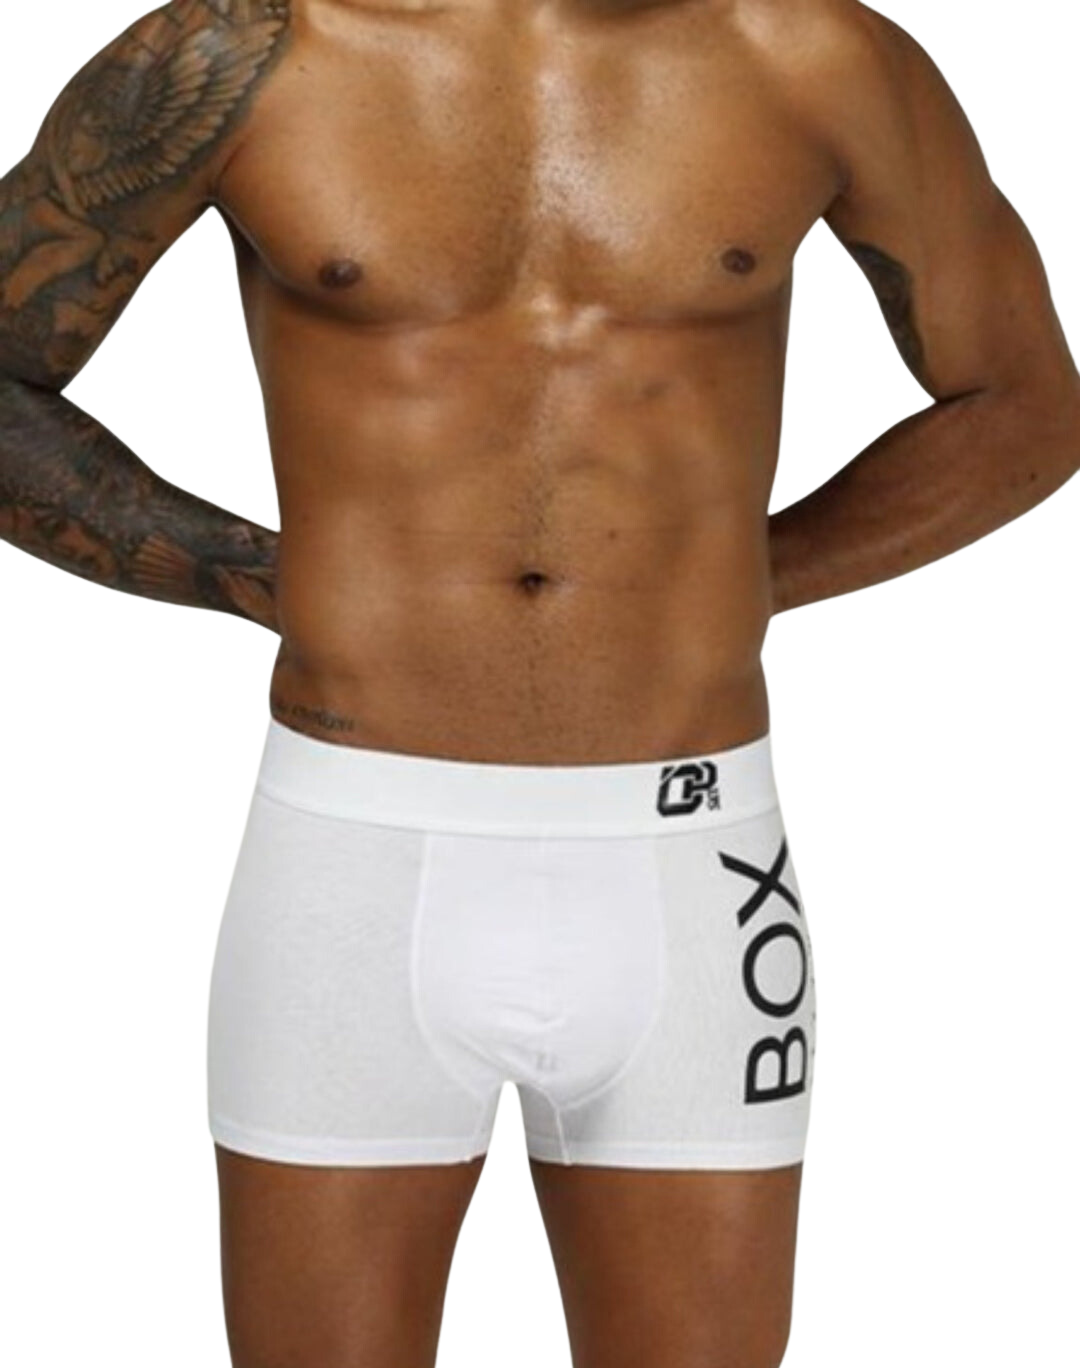 ORLVS Low-Rise "BOX" Boxerbrief Trunk